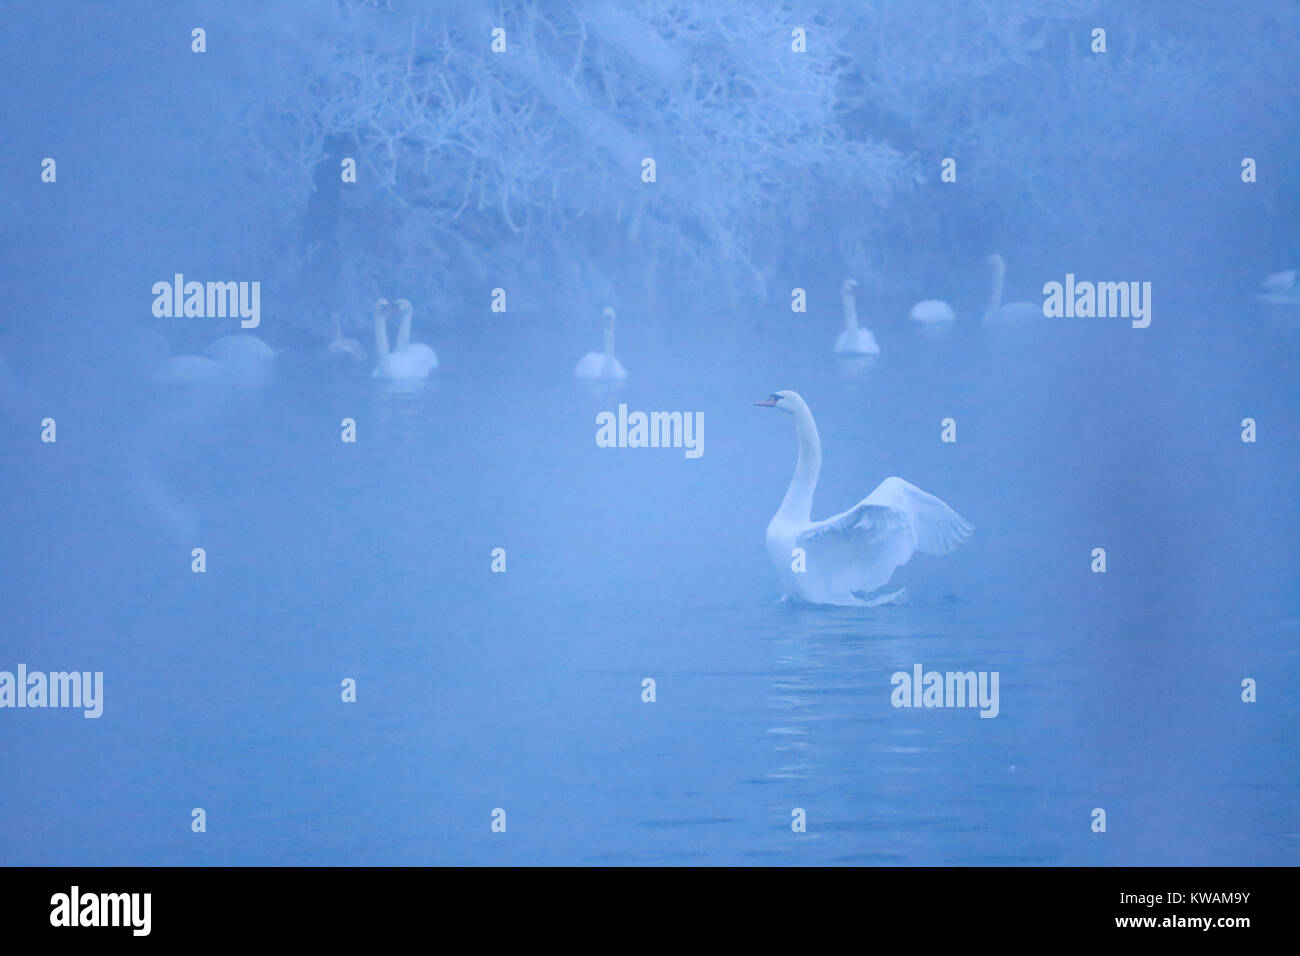 Urumqi, China's Xinjiang Uygur Autonomous Region. 1st Jan, 2018. Swans swim in the Swan Lake of Ili River Valley in Yining County, northwest China's Xinjiang Uygur Autonomous Region, Jan. 1, 2018. Thanks to the effective environmental protection measures of the local govenment, every year many swans spend the winter here. Credit: Xu Wen/Xinhua/Alamy Live News Stock Photo